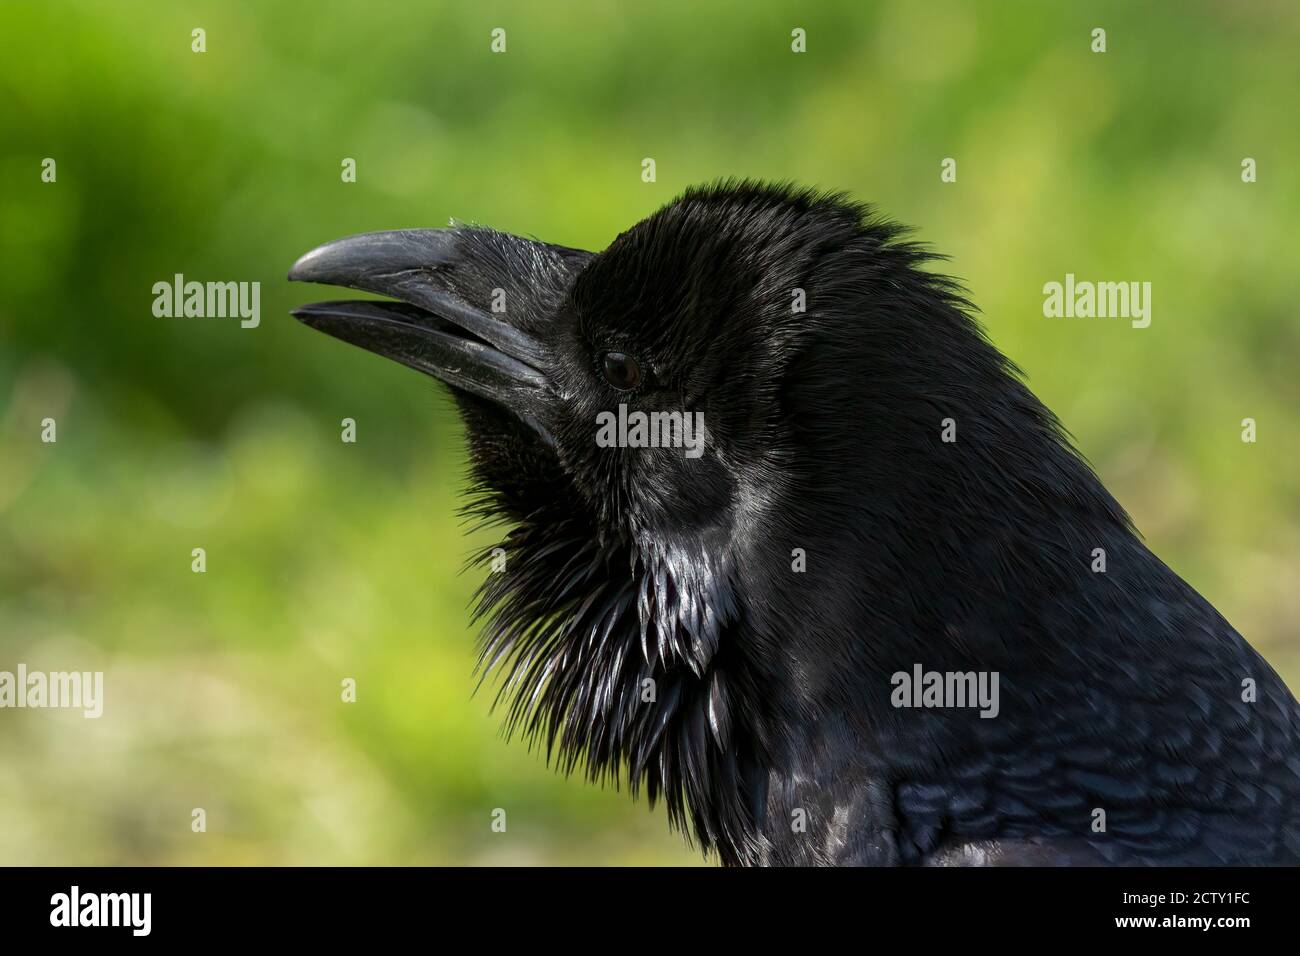 Magnificient jet black Raven, Corvus corax, with strong beak slightly open against green background Stock Photo